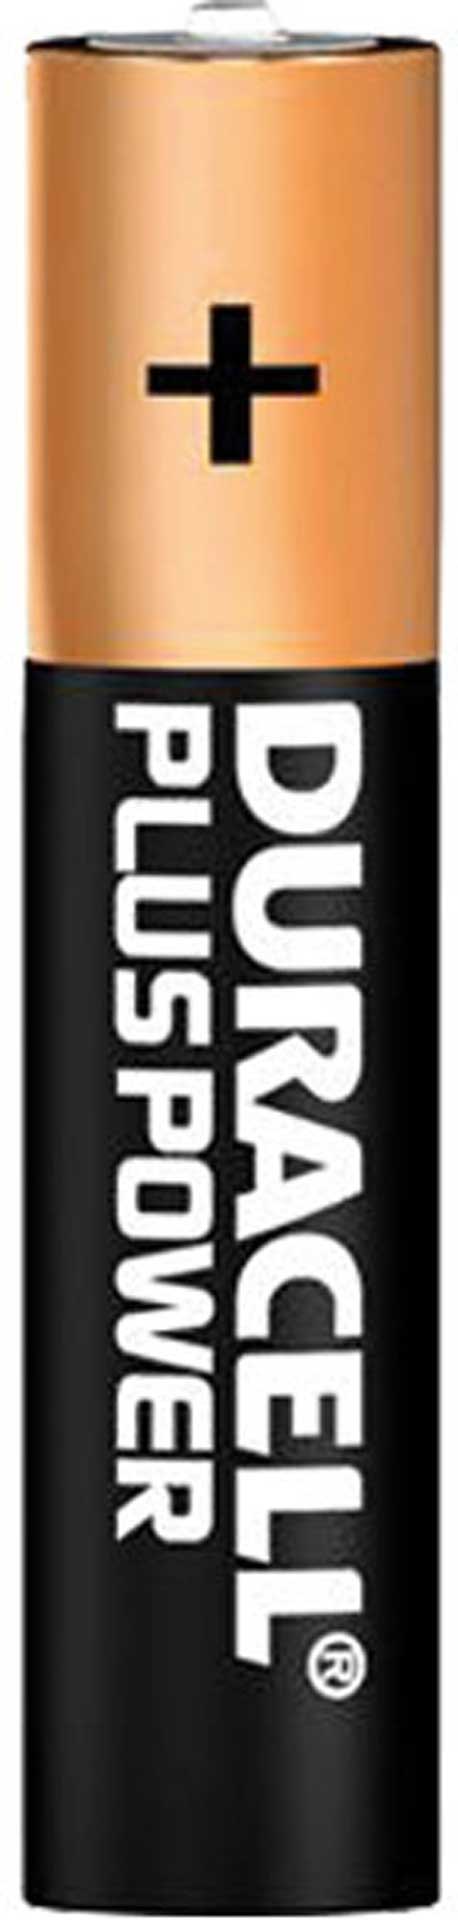 DURACELL PLUS POWER MN2400B MICRO AAA  BATTERY SQUARE BLISTER